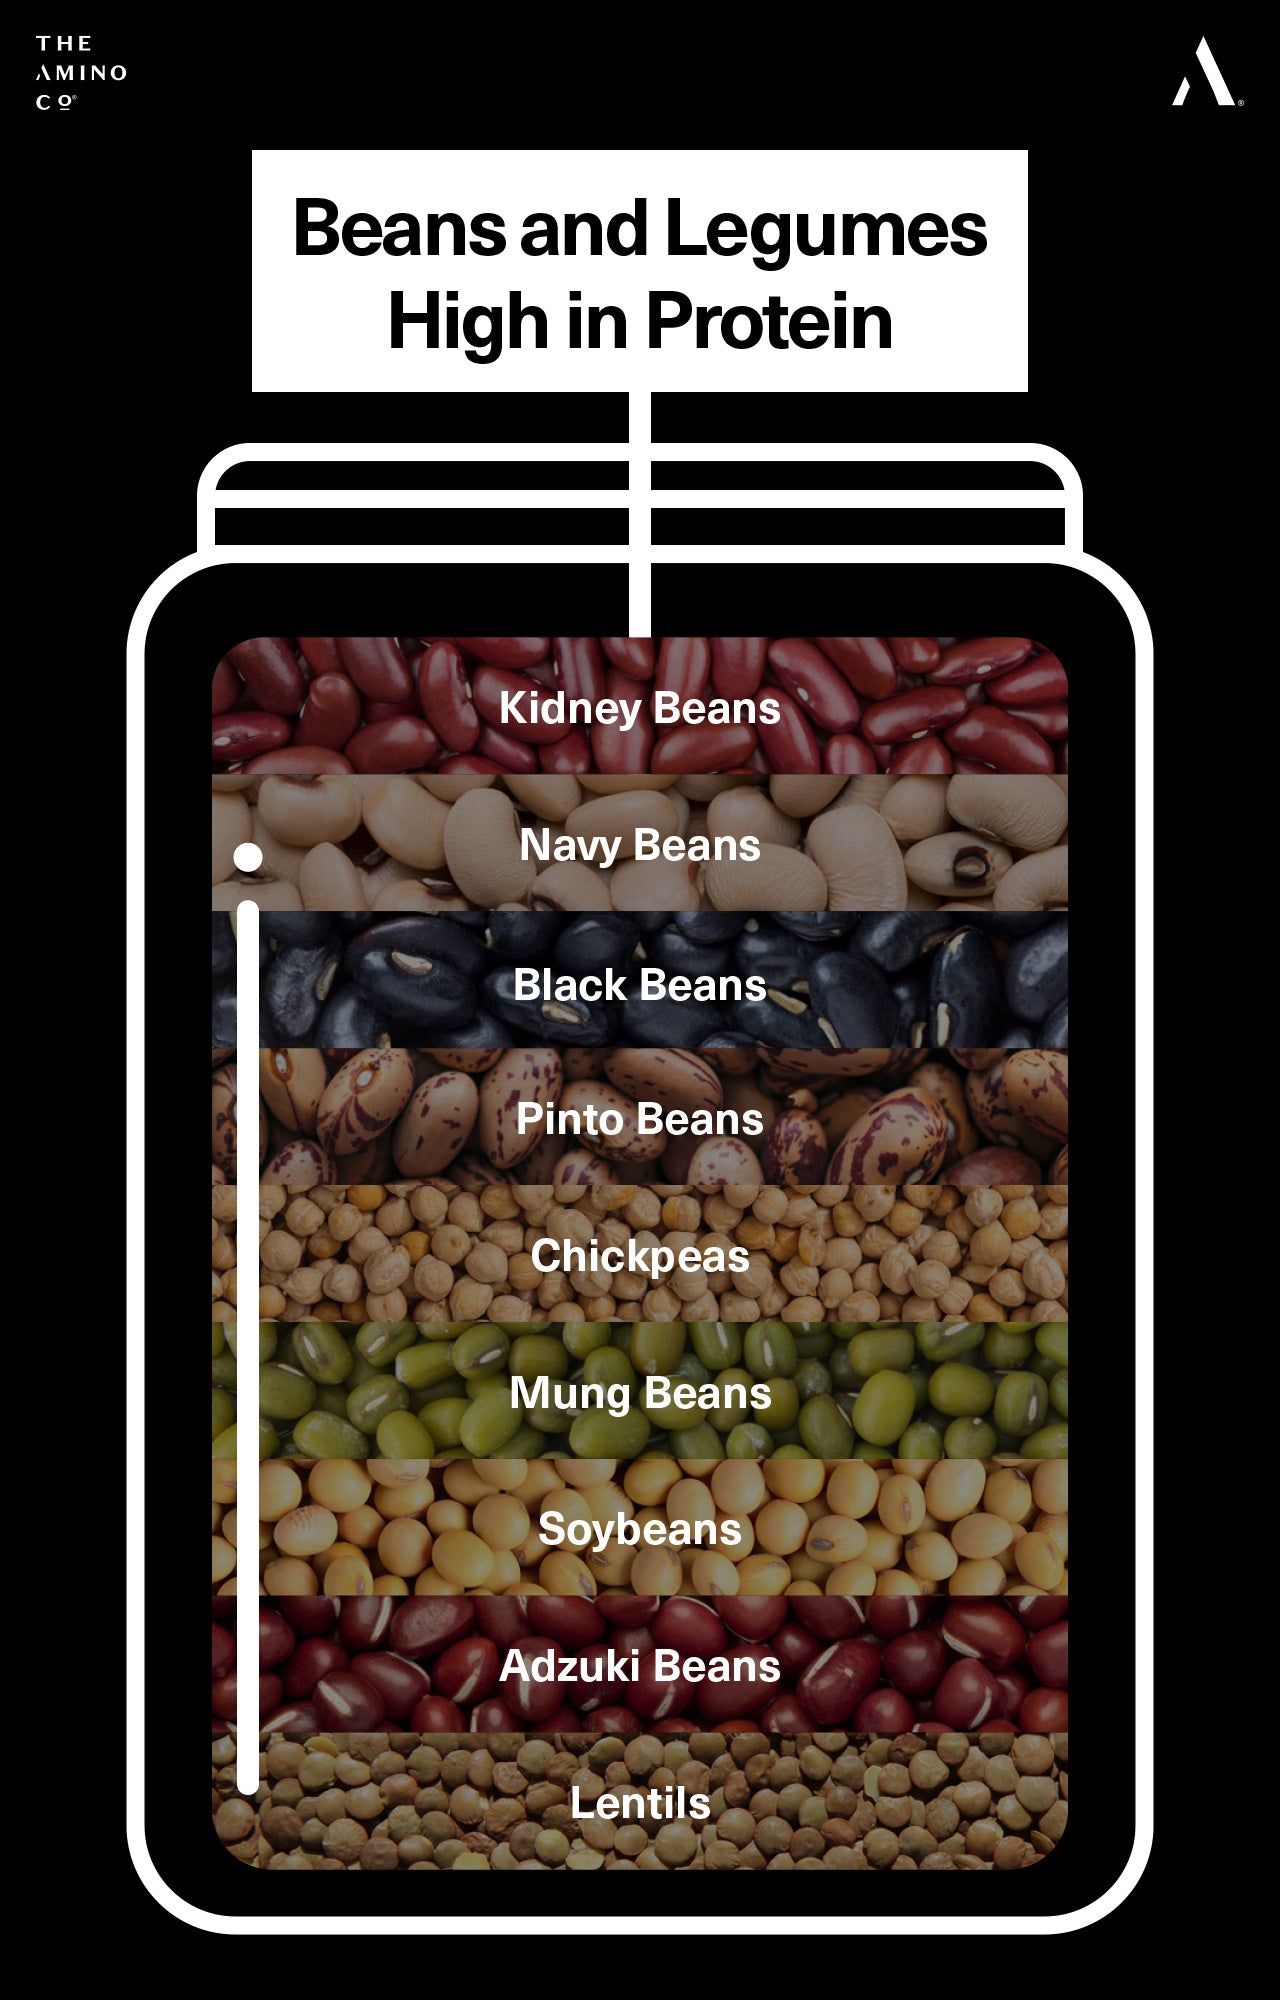 Beans and Legumes High in Protein